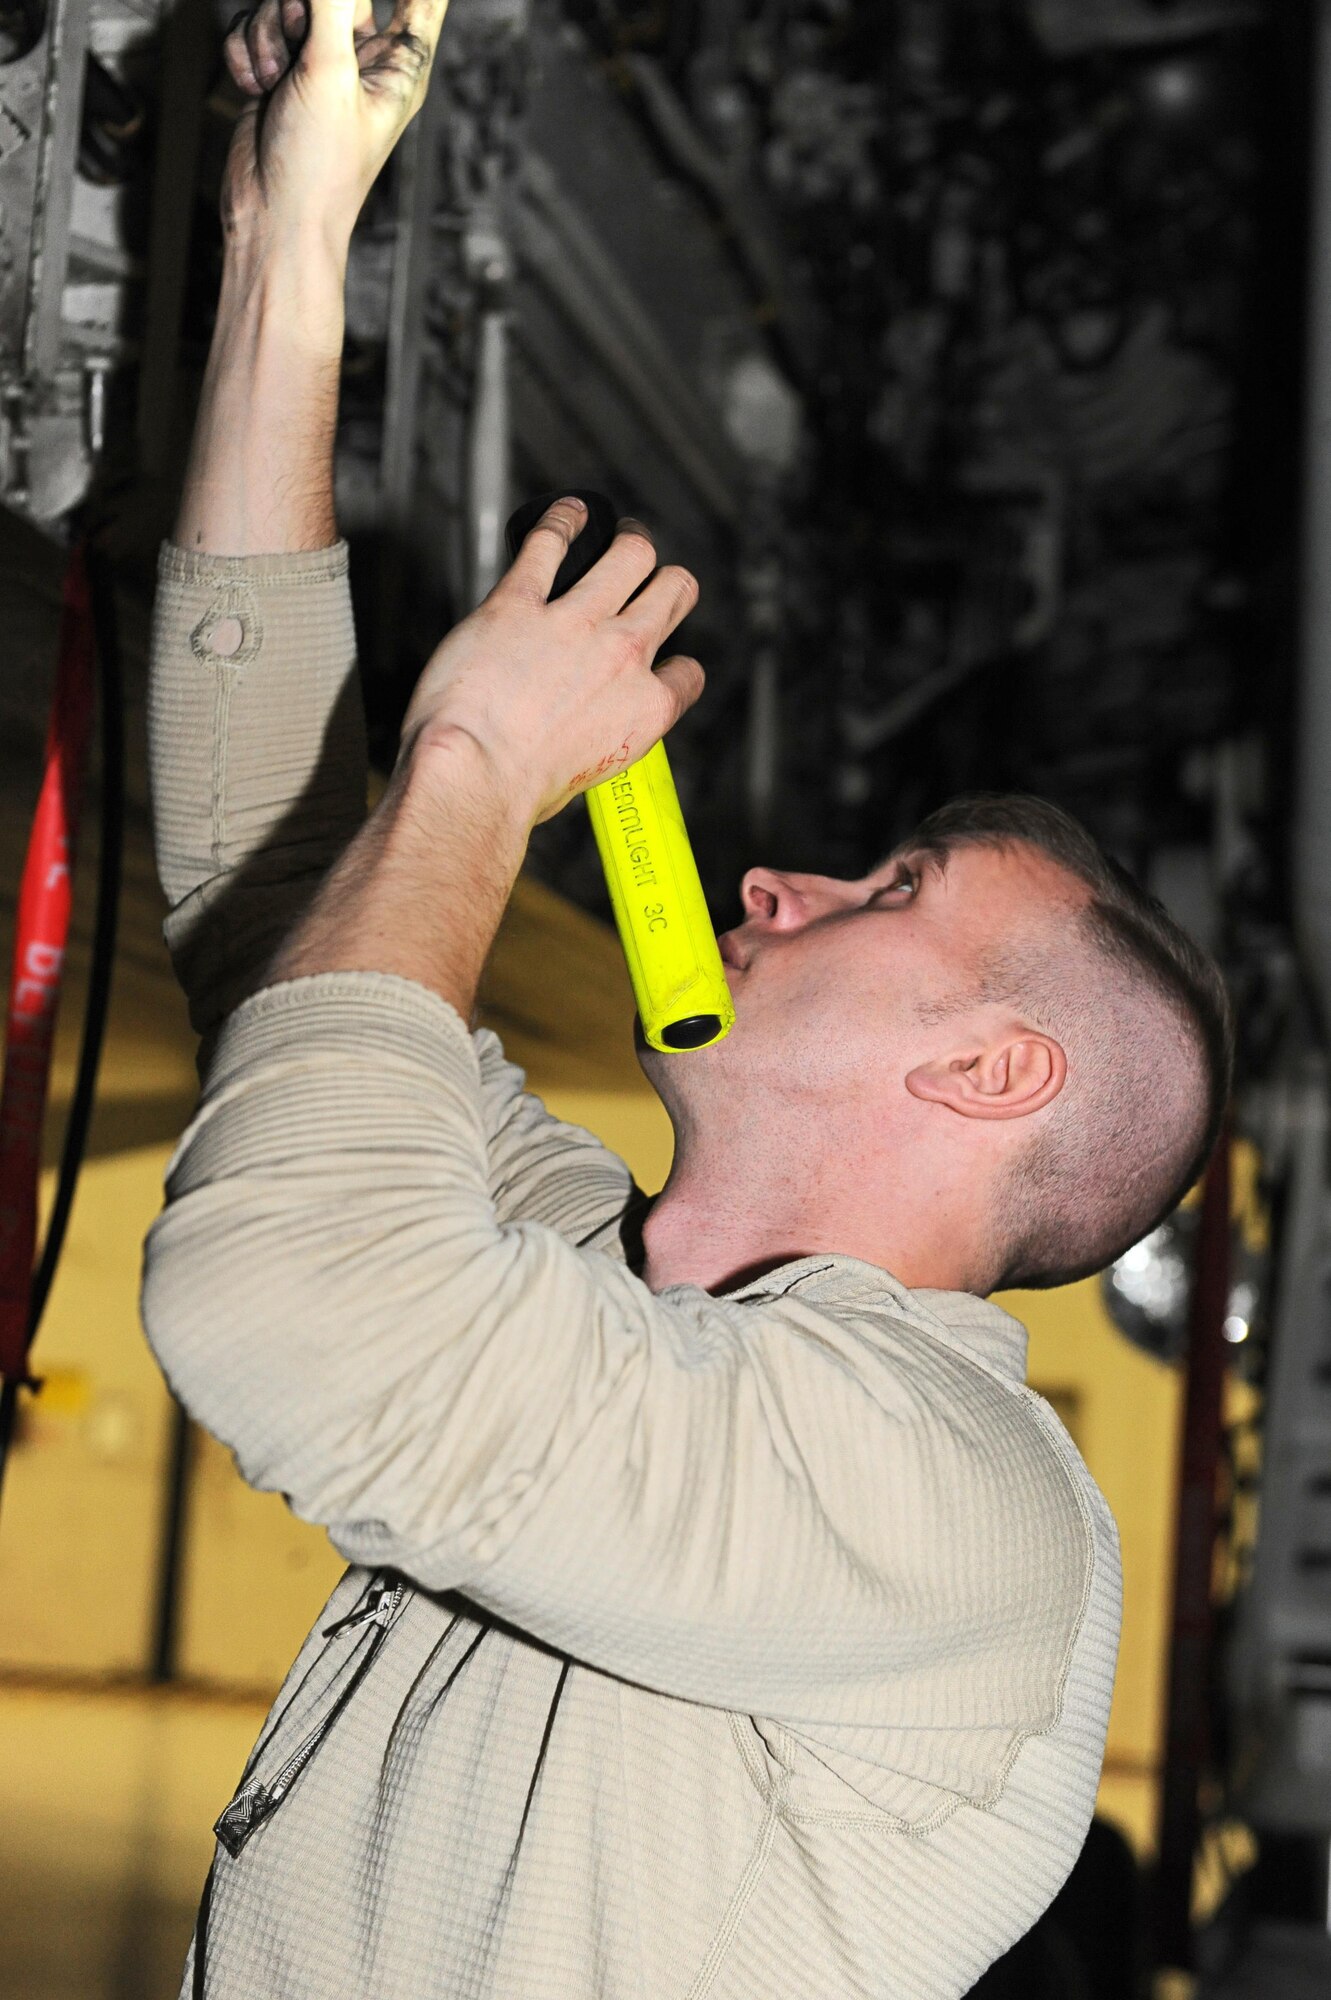 U.S. Air Force Staff Sgt. Spencer Thrasher, a 509th Aircraft Maintenance Squadron dedicated crew chief, inspects the brake hydraulic lines on a B-2 aircraft during a quick-turn inspection at Whiteman Air Force Base, Mo., Feb. 2, 2016, prior to a mission during Red Flag (RF) 16-1 exercise. RF is held at Nellis AFB, Nev., and is a realistic combat training exercise that provides a heavily-contested and degraded operational environment to prepare crews for possible major combat operations. (U.S. Air Force photo by Tech. Sgt. Miguel Lara III)